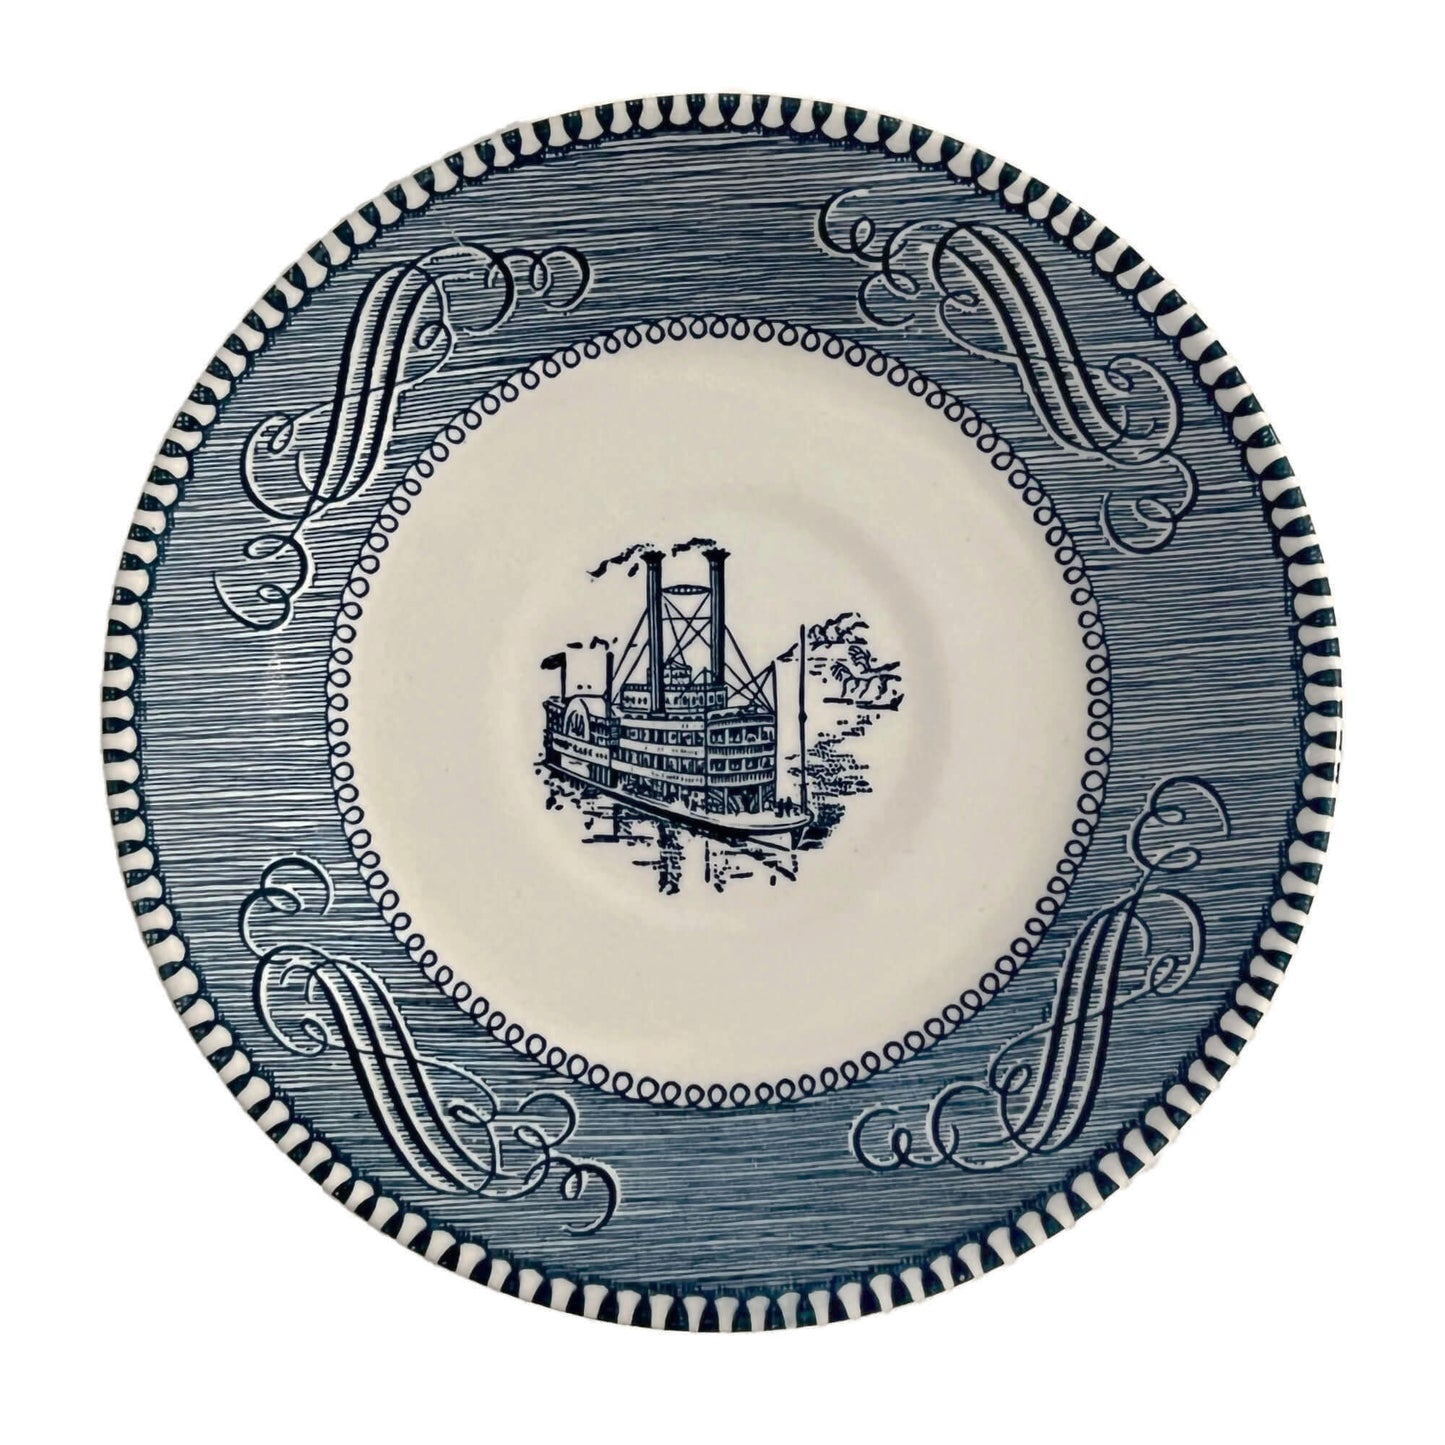 Currier and Ives Blue Flat Cup Saucer, 6 1/4 in. Paddleboat, Steamboat by Royal China